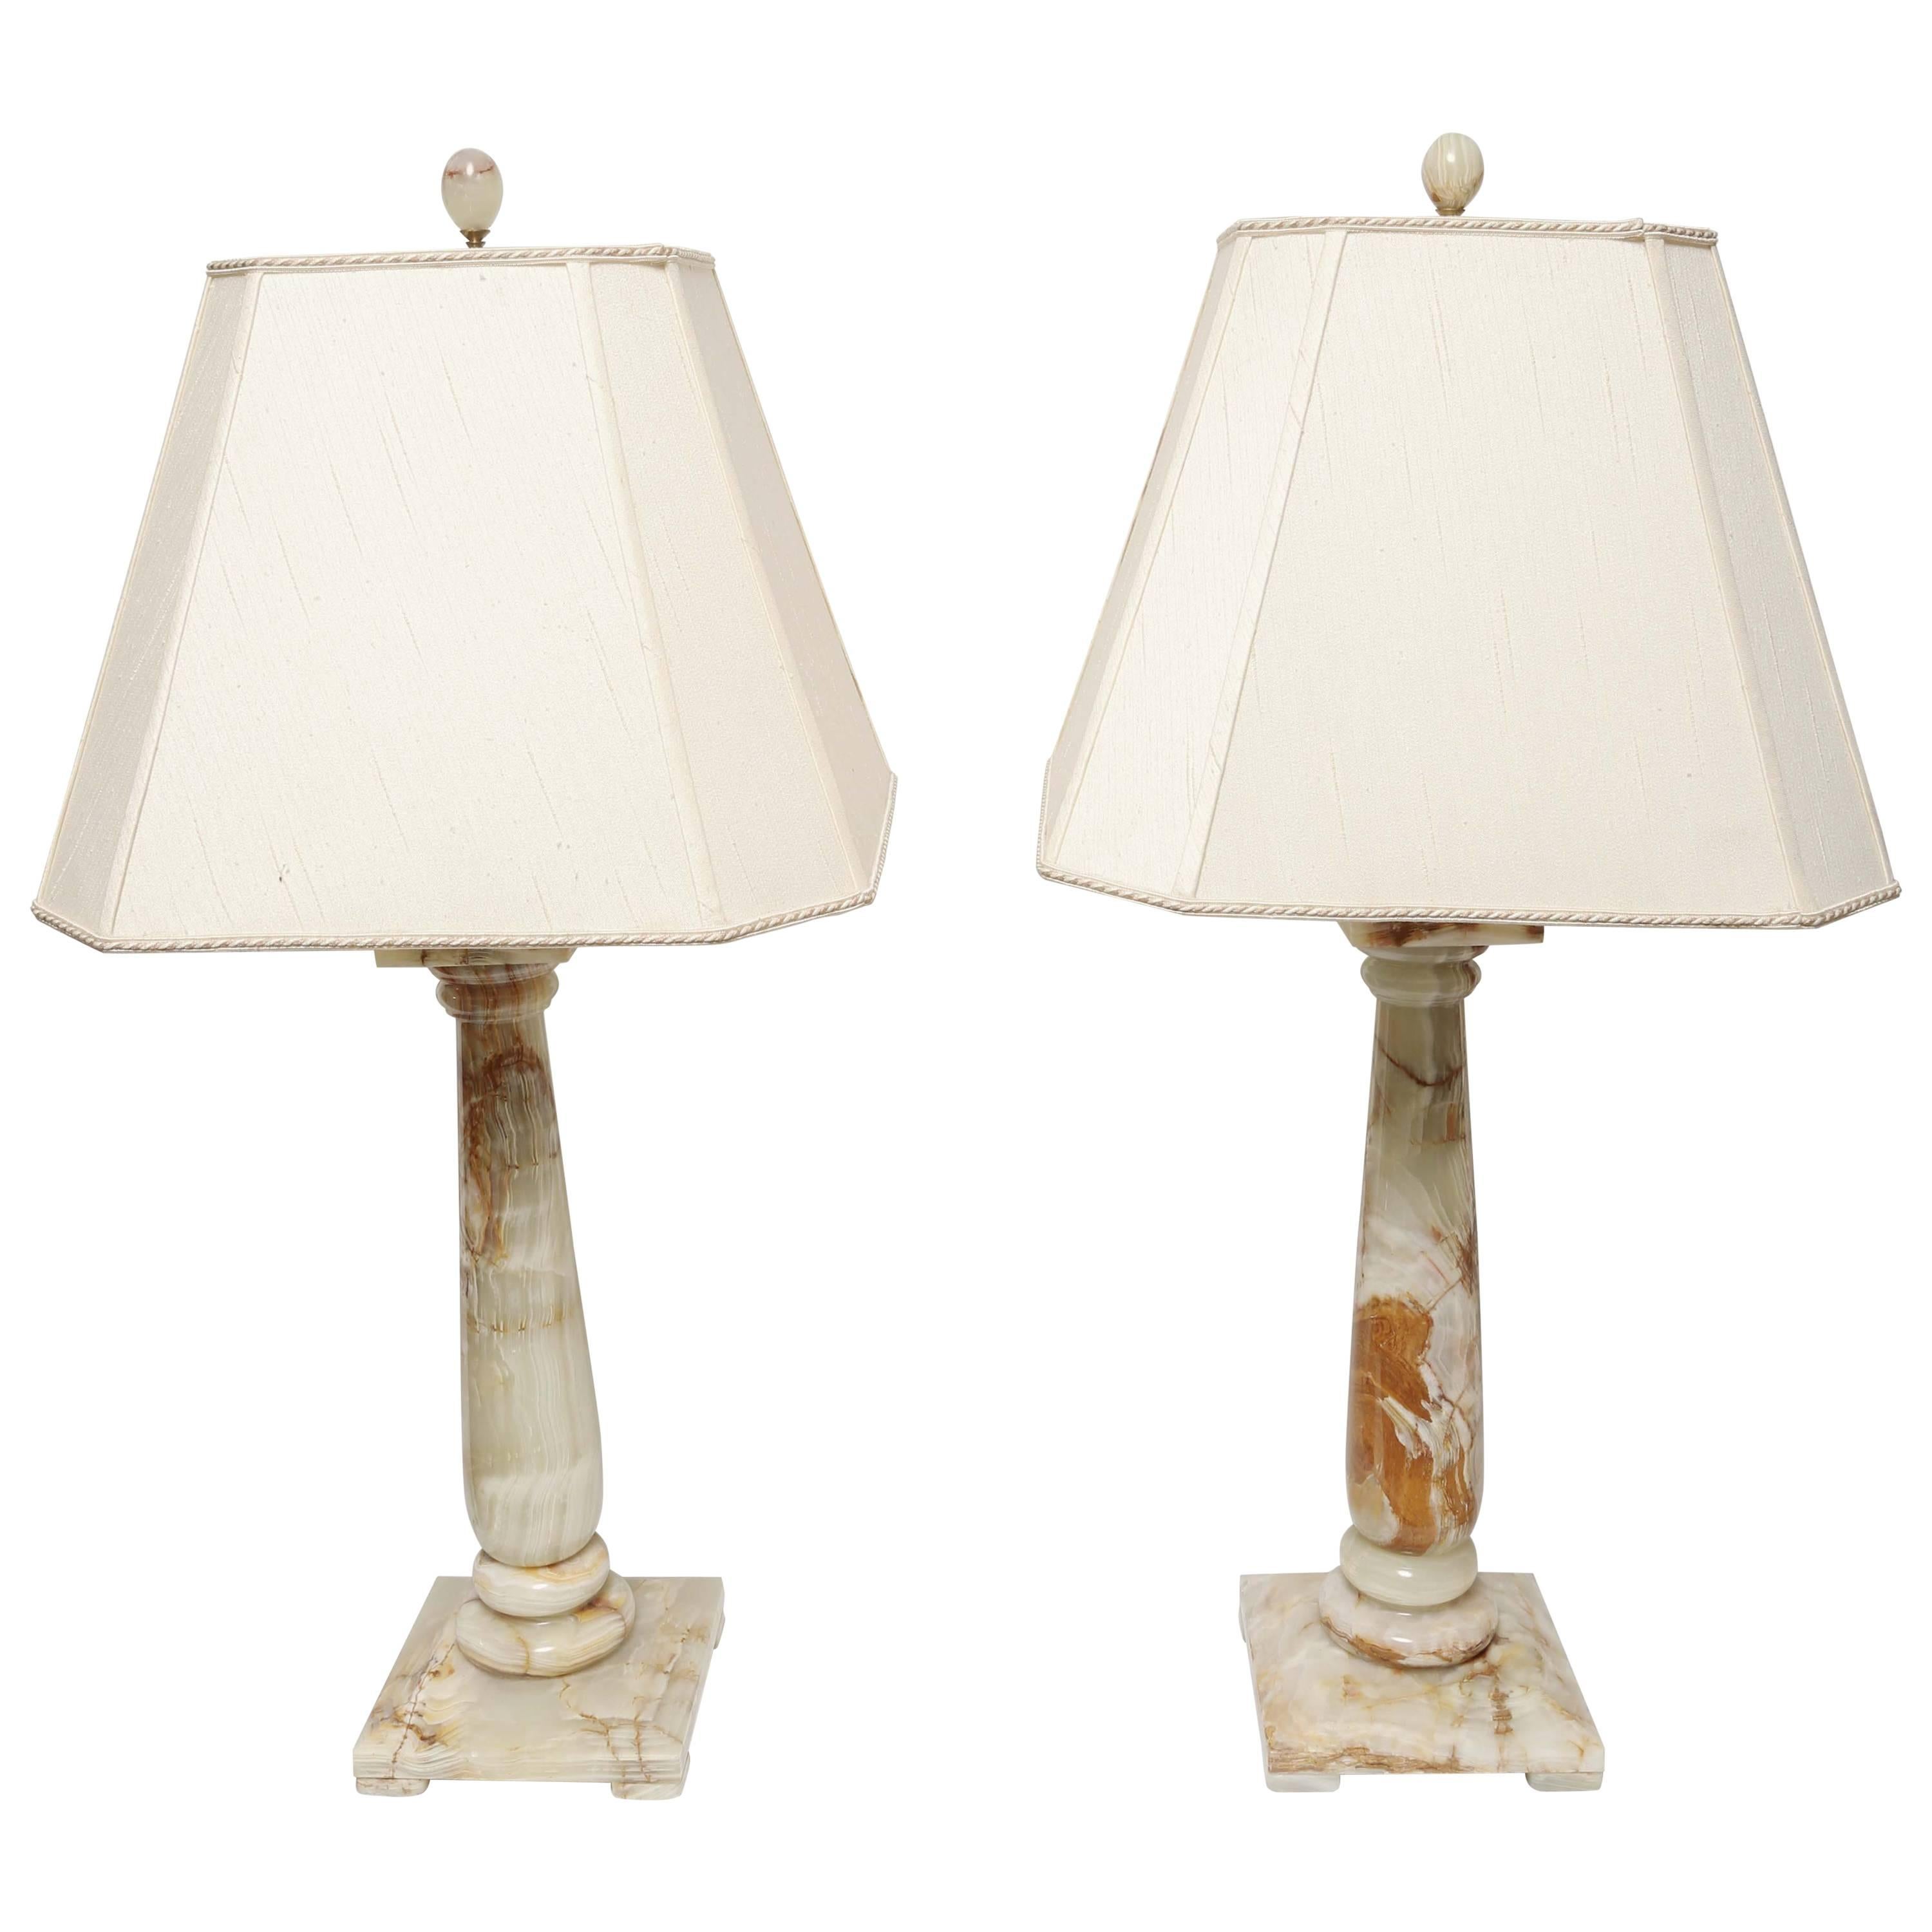 Pair of Mid-Century Modern Classical Hollywood Regency Architectural Onyx Lamps For Sale